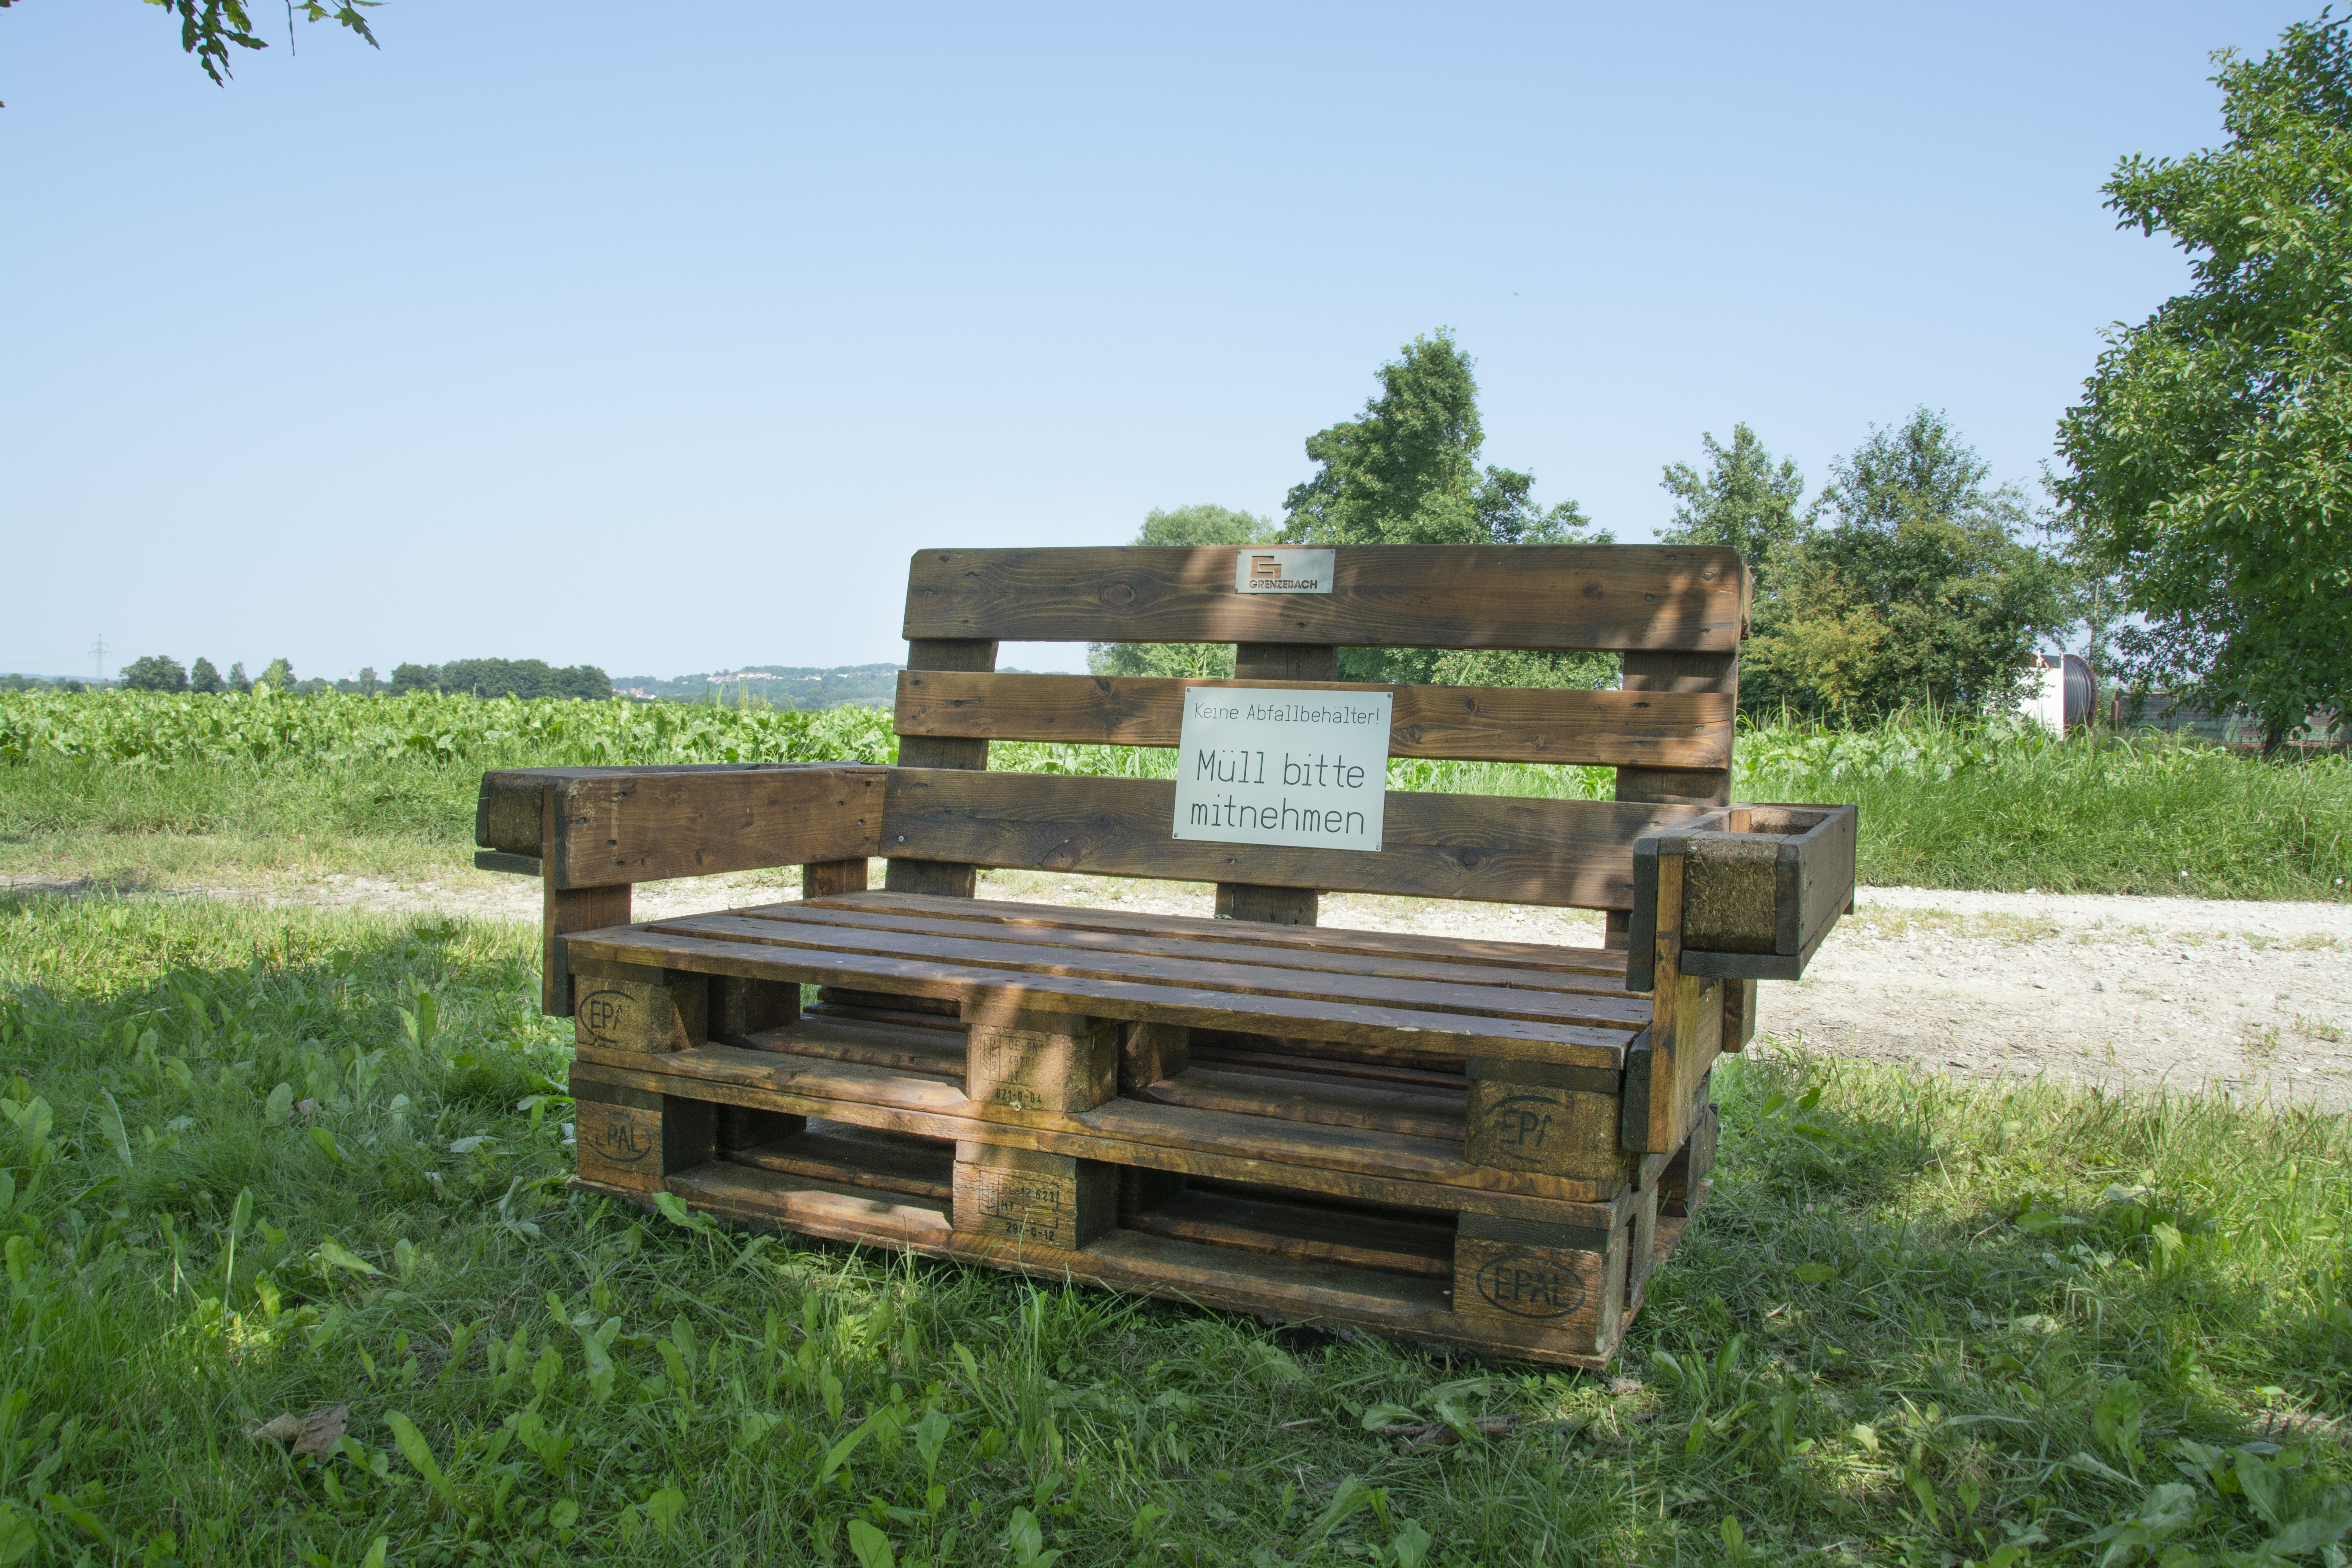 The pallet furniture set up at the biotope in Hamlar, a seating area for employees and passers-by, was equipped with signs asking the visitors to "Please take your garbage with you" to prevent environmental pollution caused by piles of garbage.